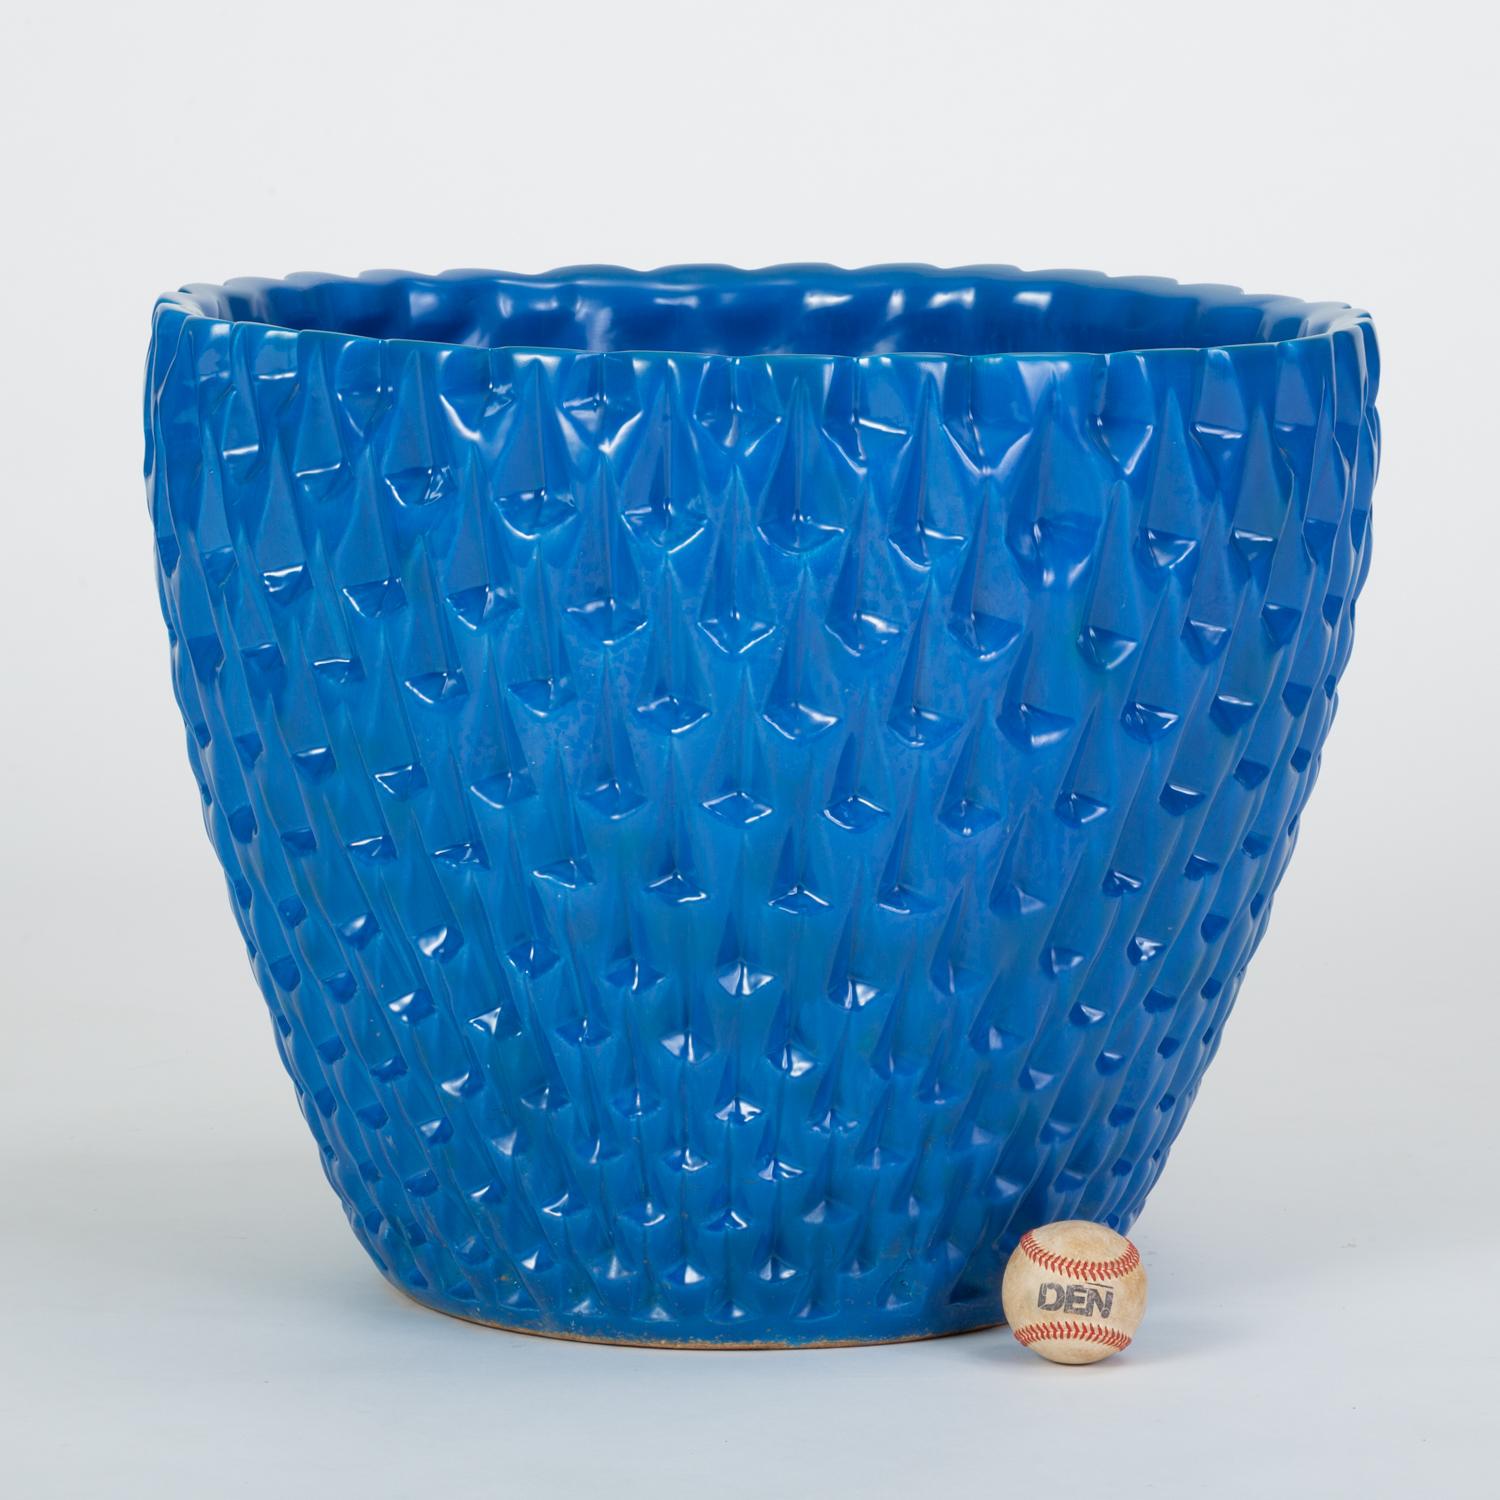 Designed by David Cressey in 1963 as part of the Pro/Artisan stoneware collection for Architectural Pottery, the slipcast Phoenix planter has a bowl shape with an allover geometric relief. This example is has a cerulean blue glaze with a glossy